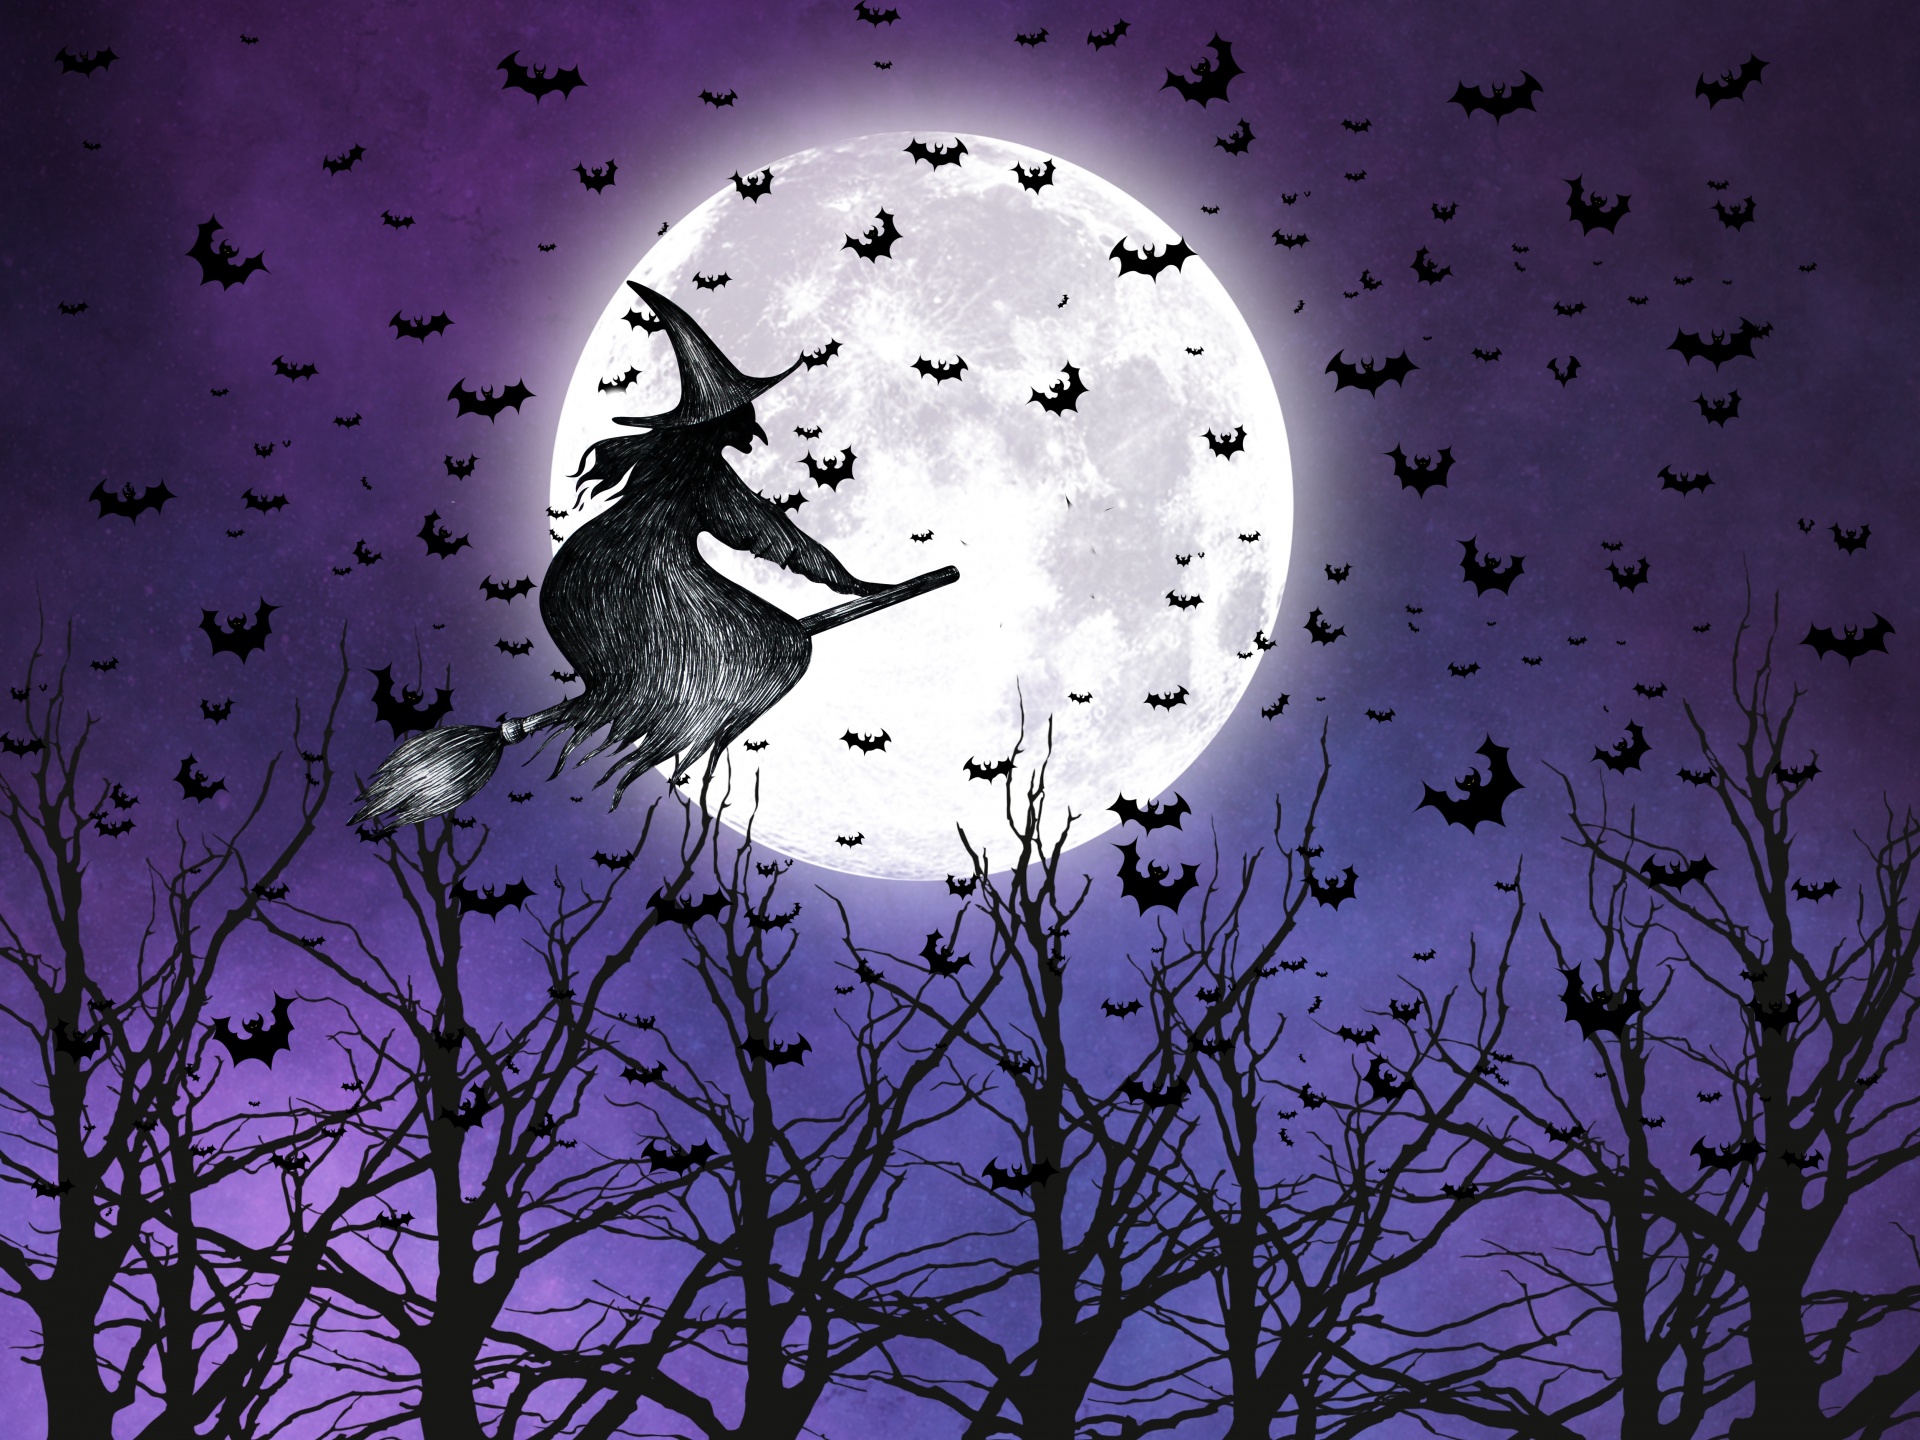 silhouette witch flying with bats in front of a full moon and over silhouetted tree tops